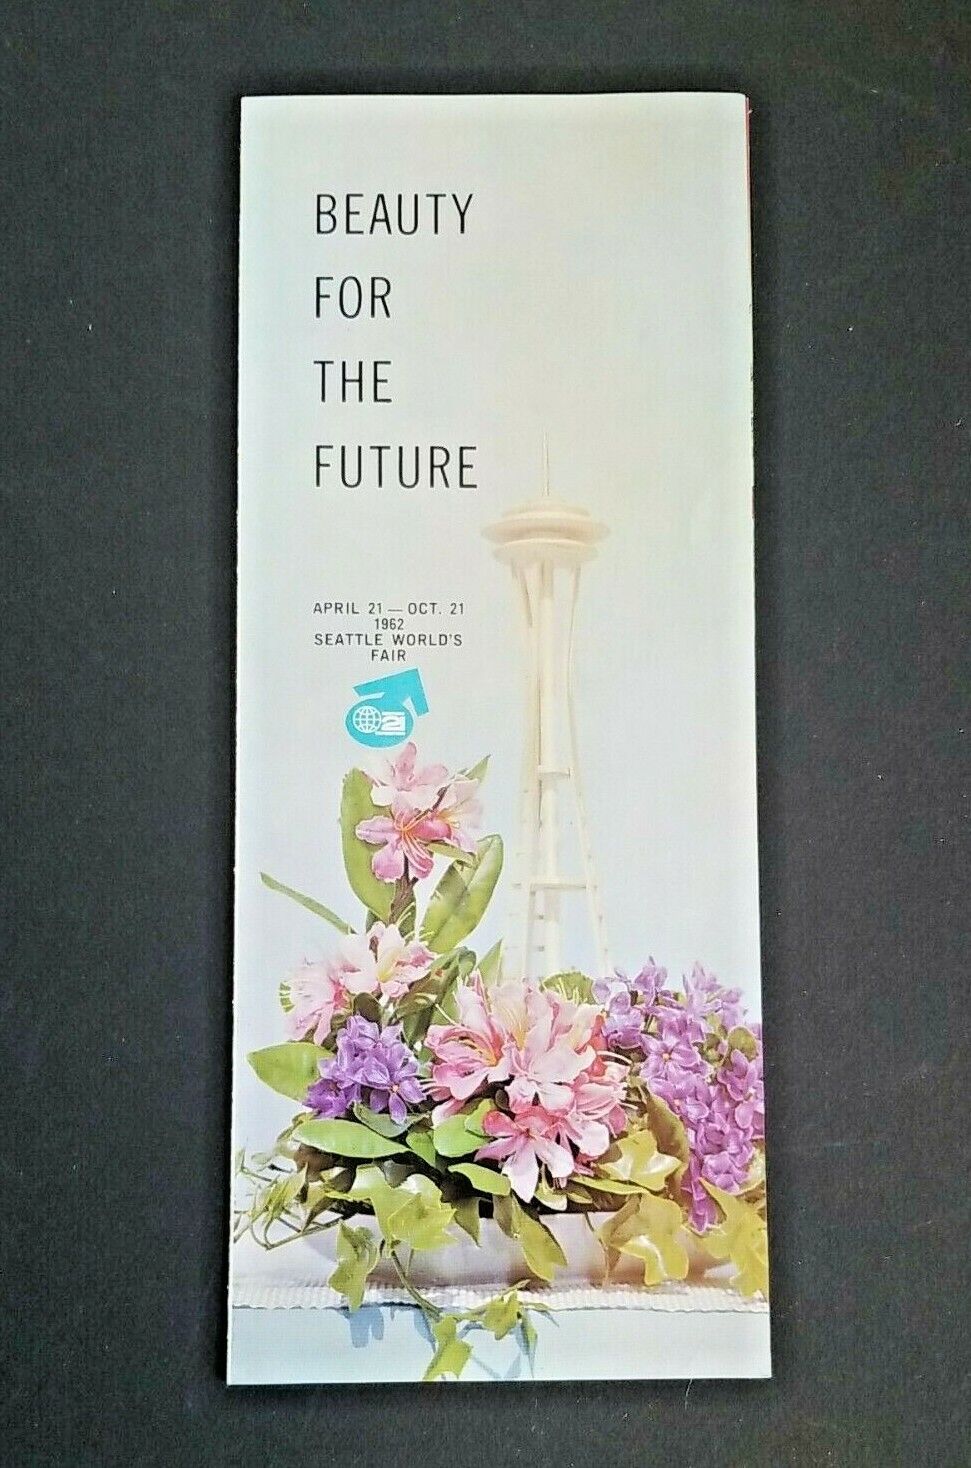 SEATTLE WORLD'S FAIR *** BEAUTY FOR THE FUTURE *** CALART FLOWERS ***